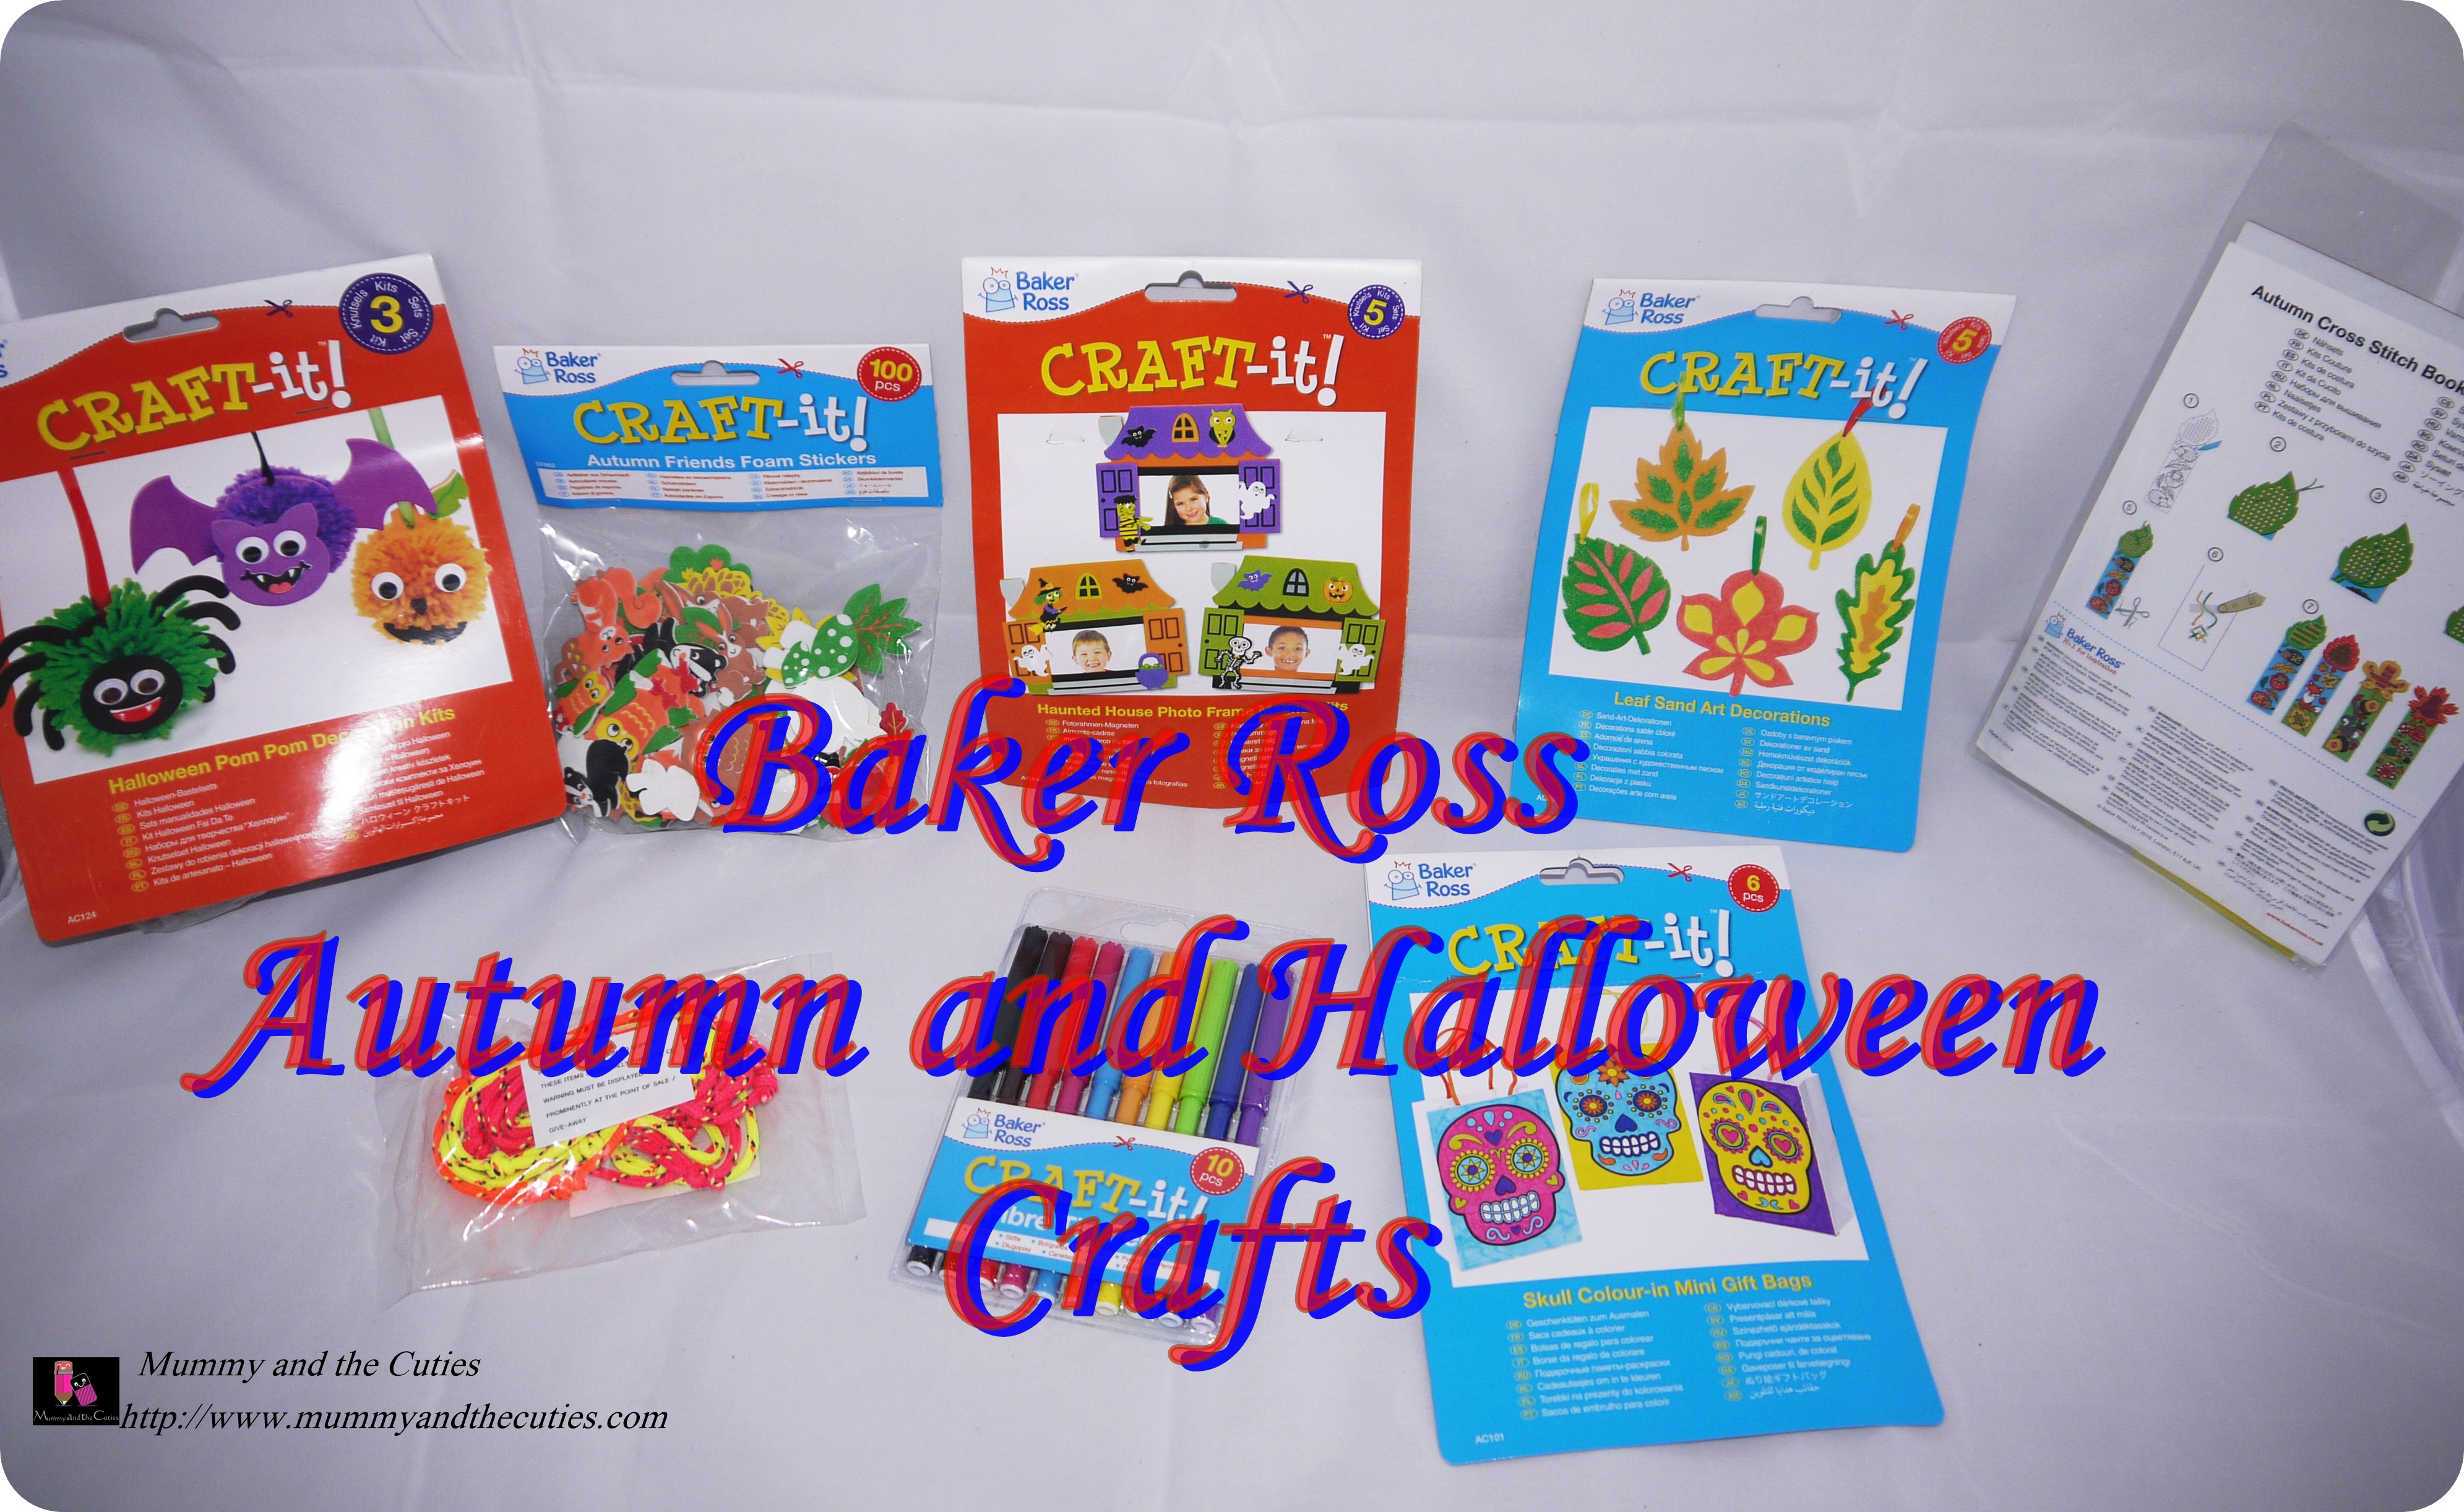 Autumn and Halloween crafting from Baker Ross